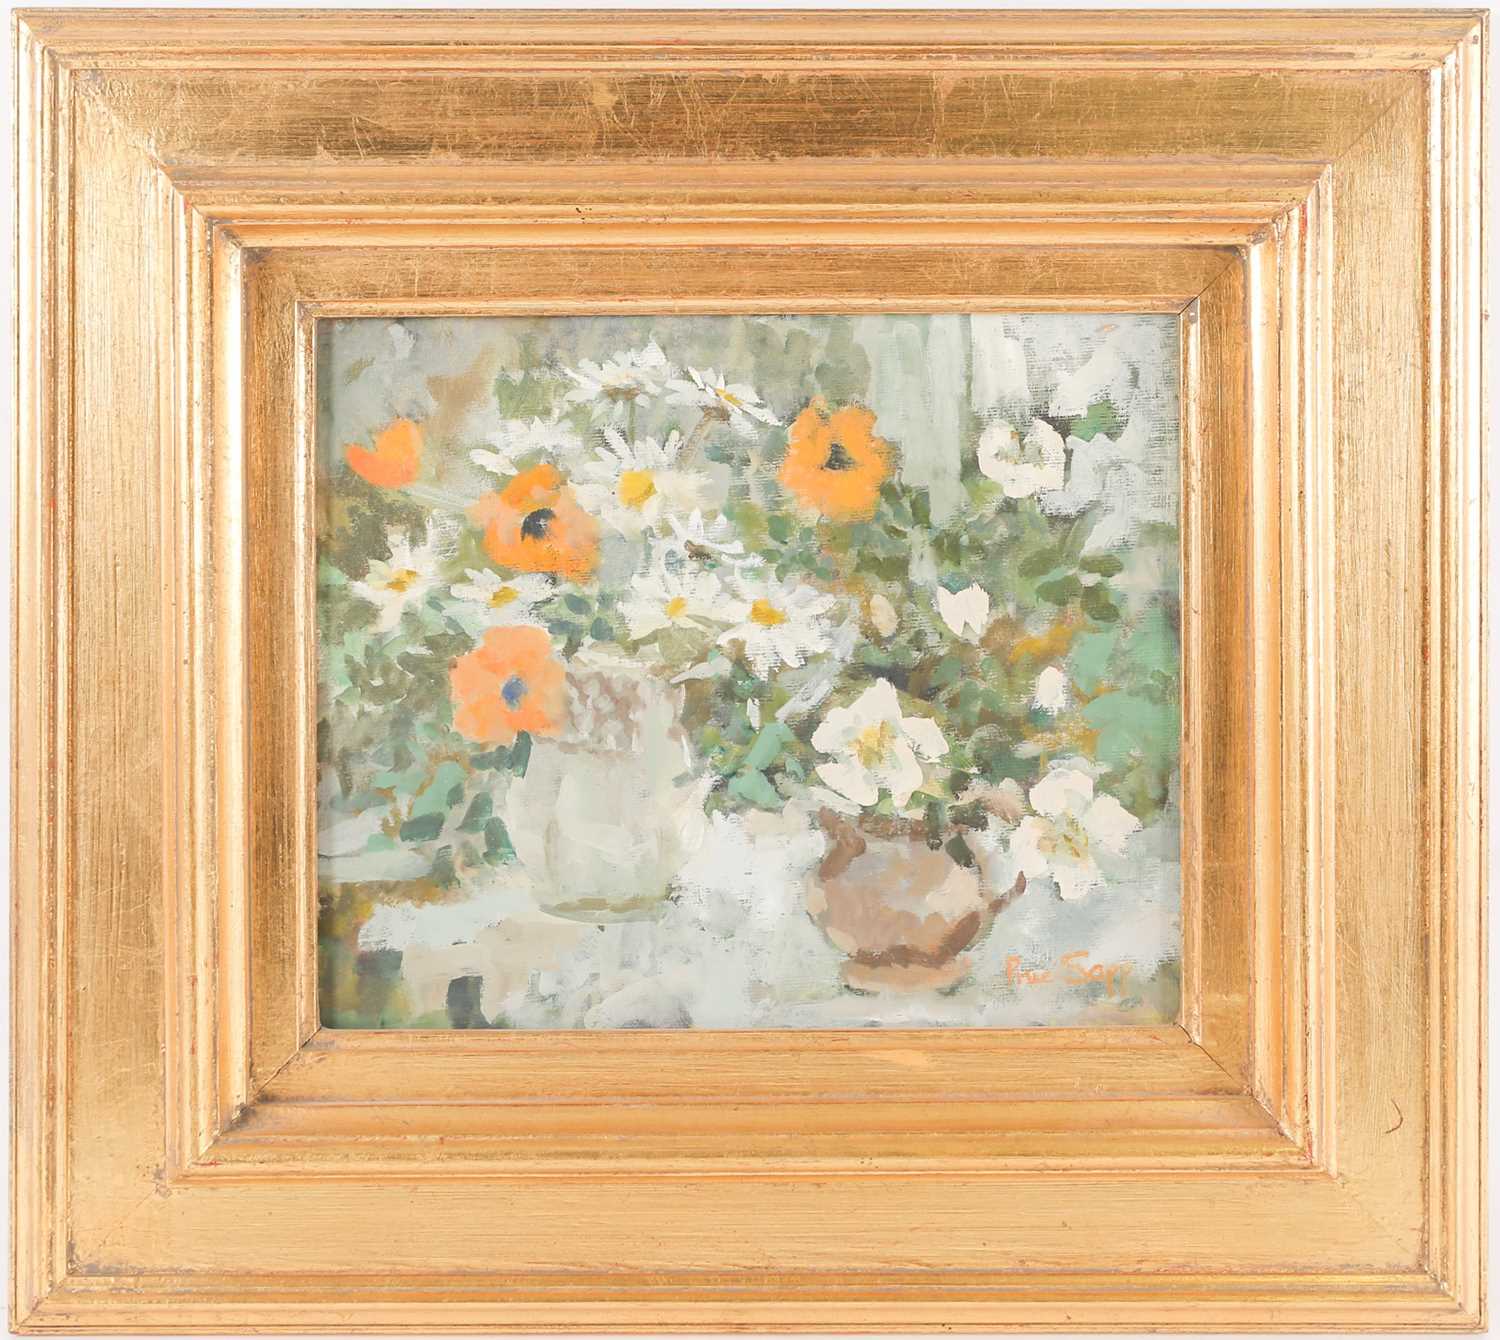 Prue Sapp (1928-2013), 'Summer Flowers', still life study, oil on panel, signed to lower right